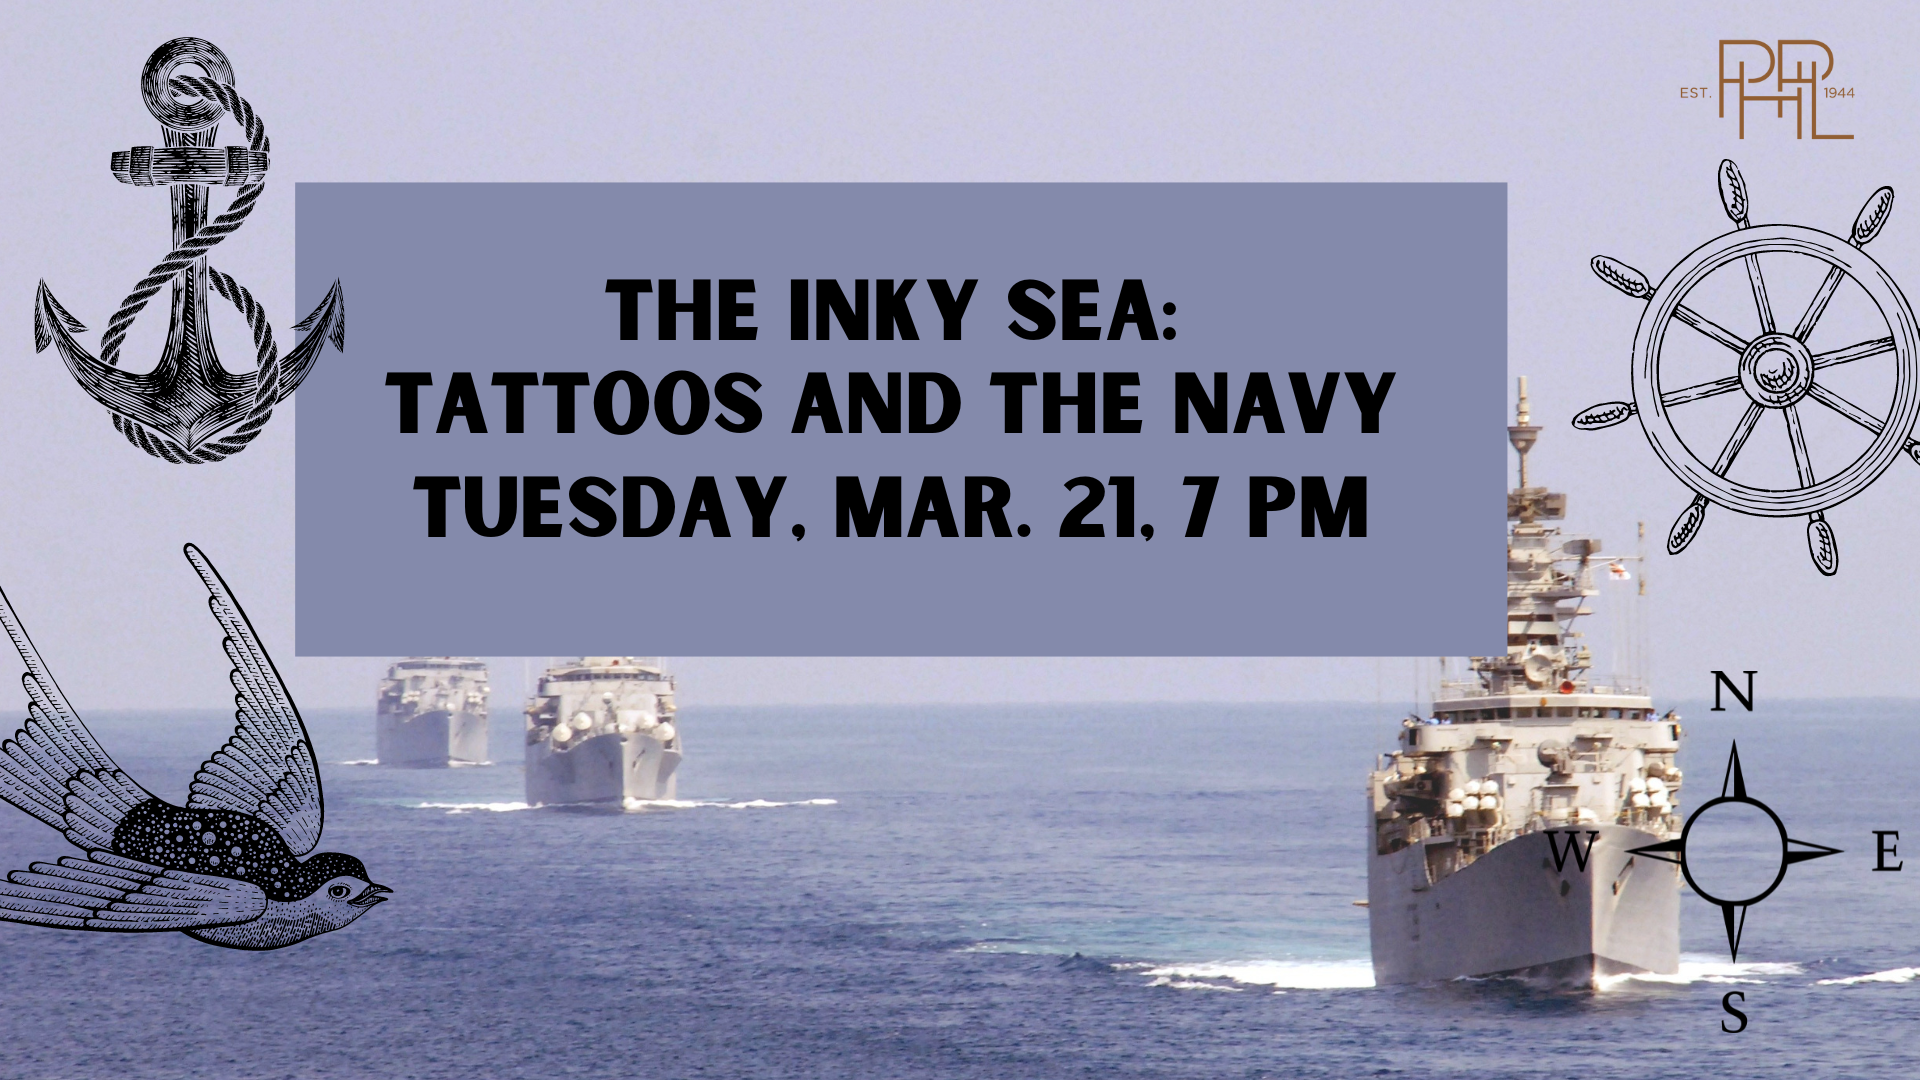 The Inky Sea: Tattoos and the Navy